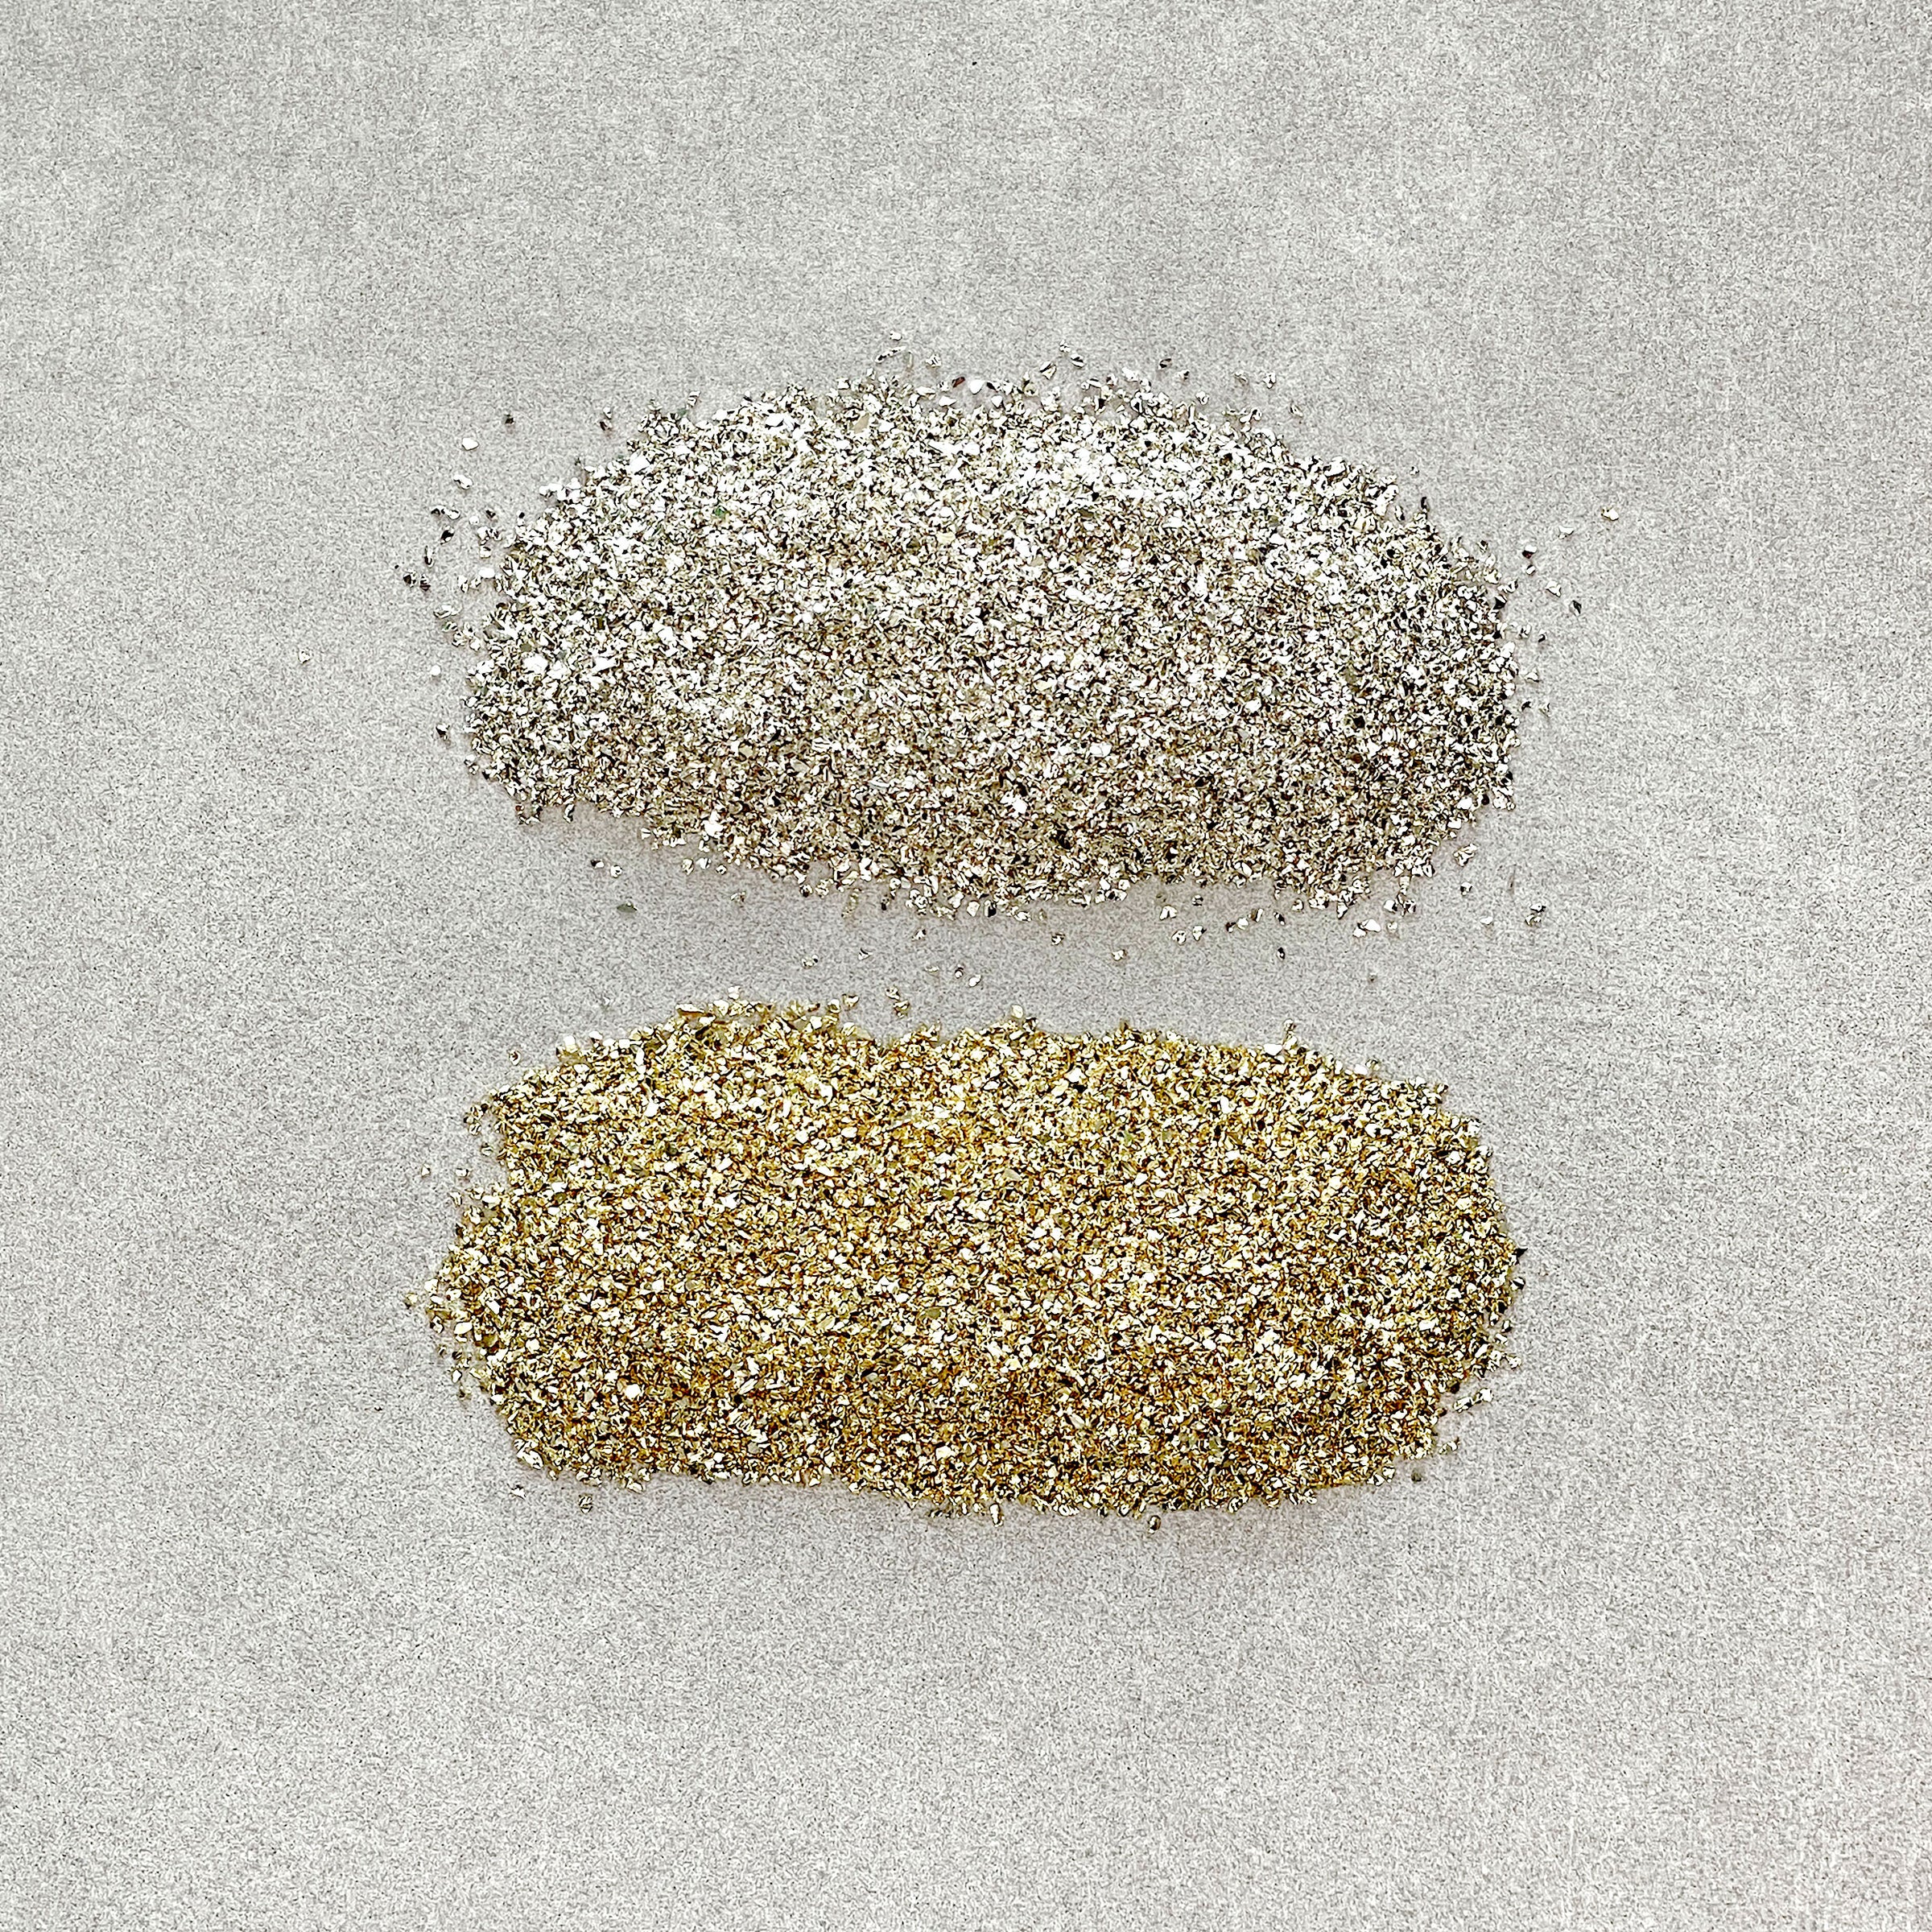 Gold Crushed Glass (10 grams), Crushed Glass